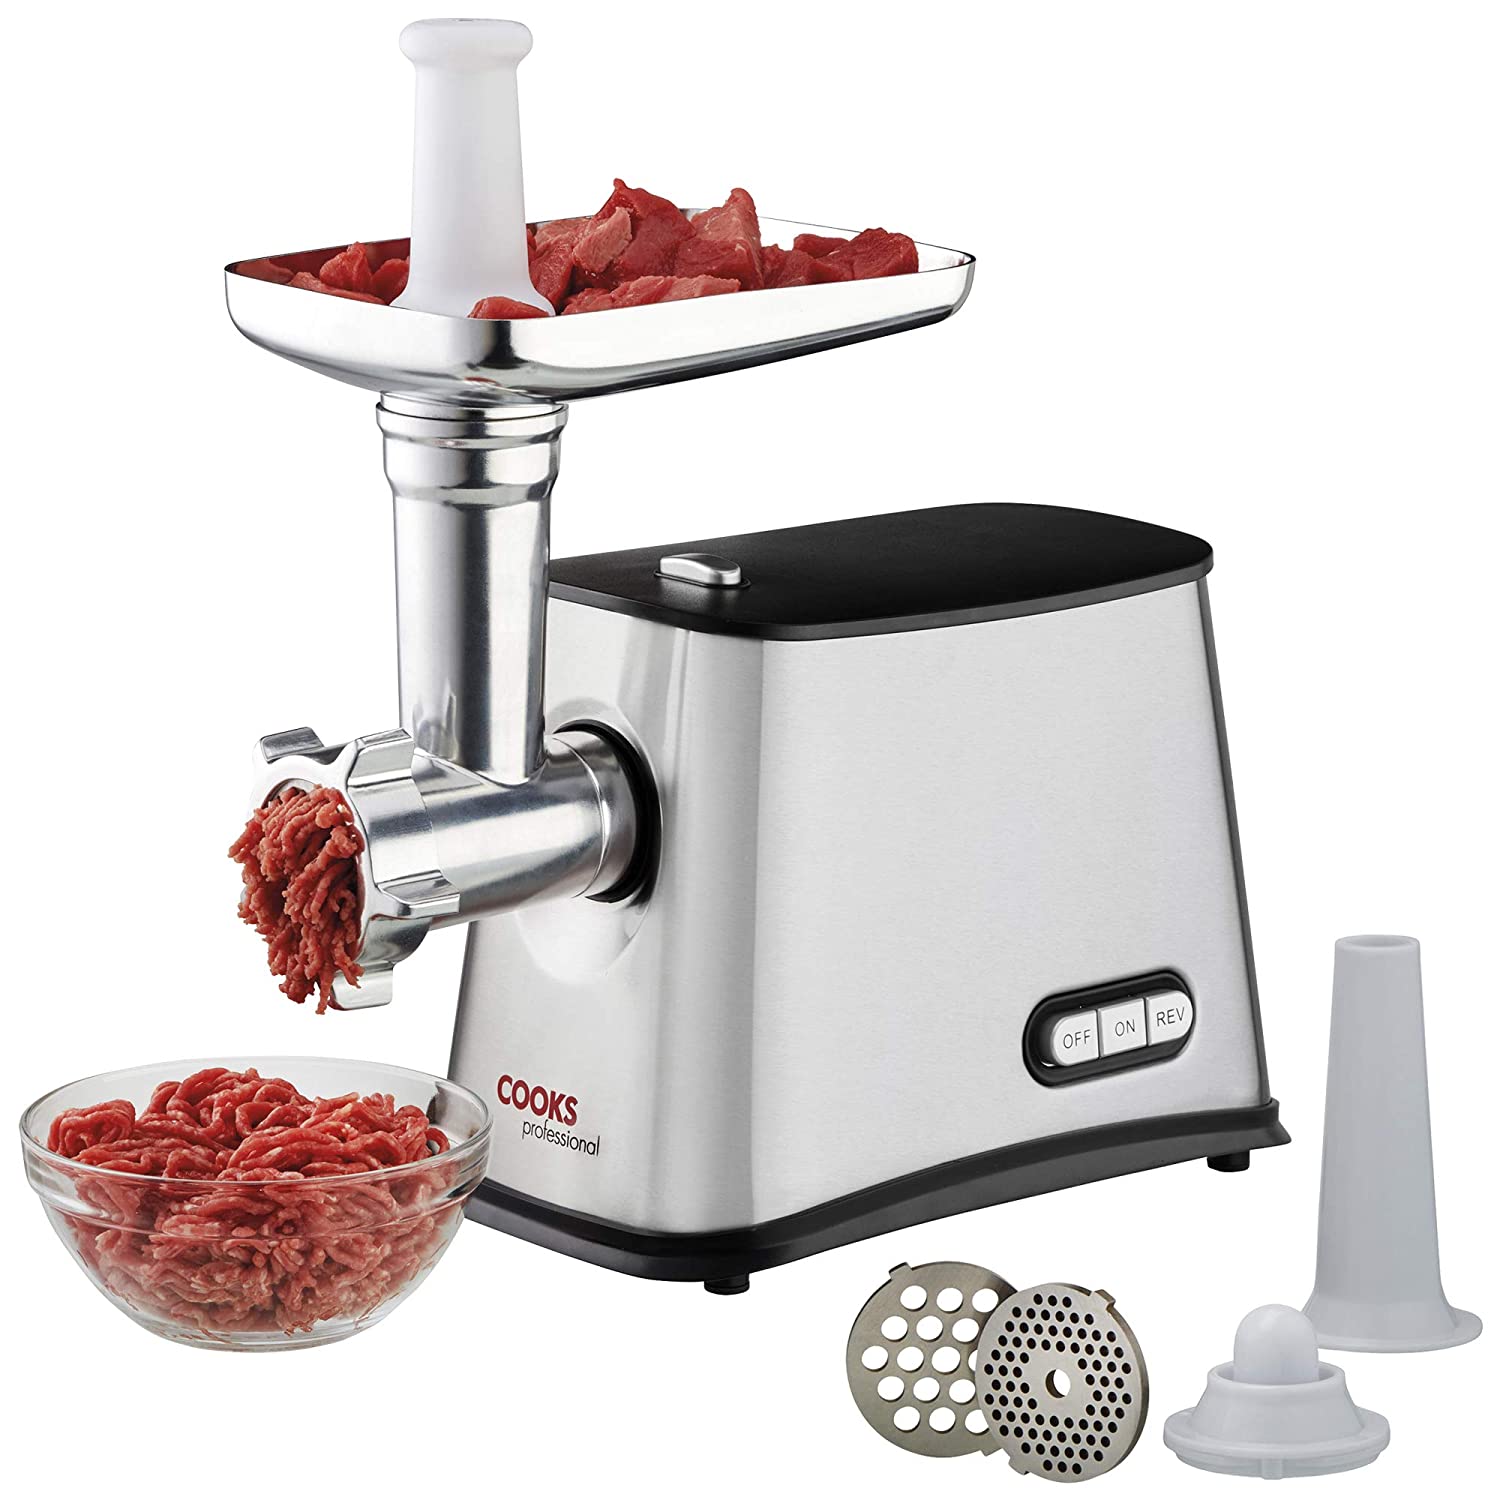 3 Important things to keep in Mind before Buying a Meat Grinder